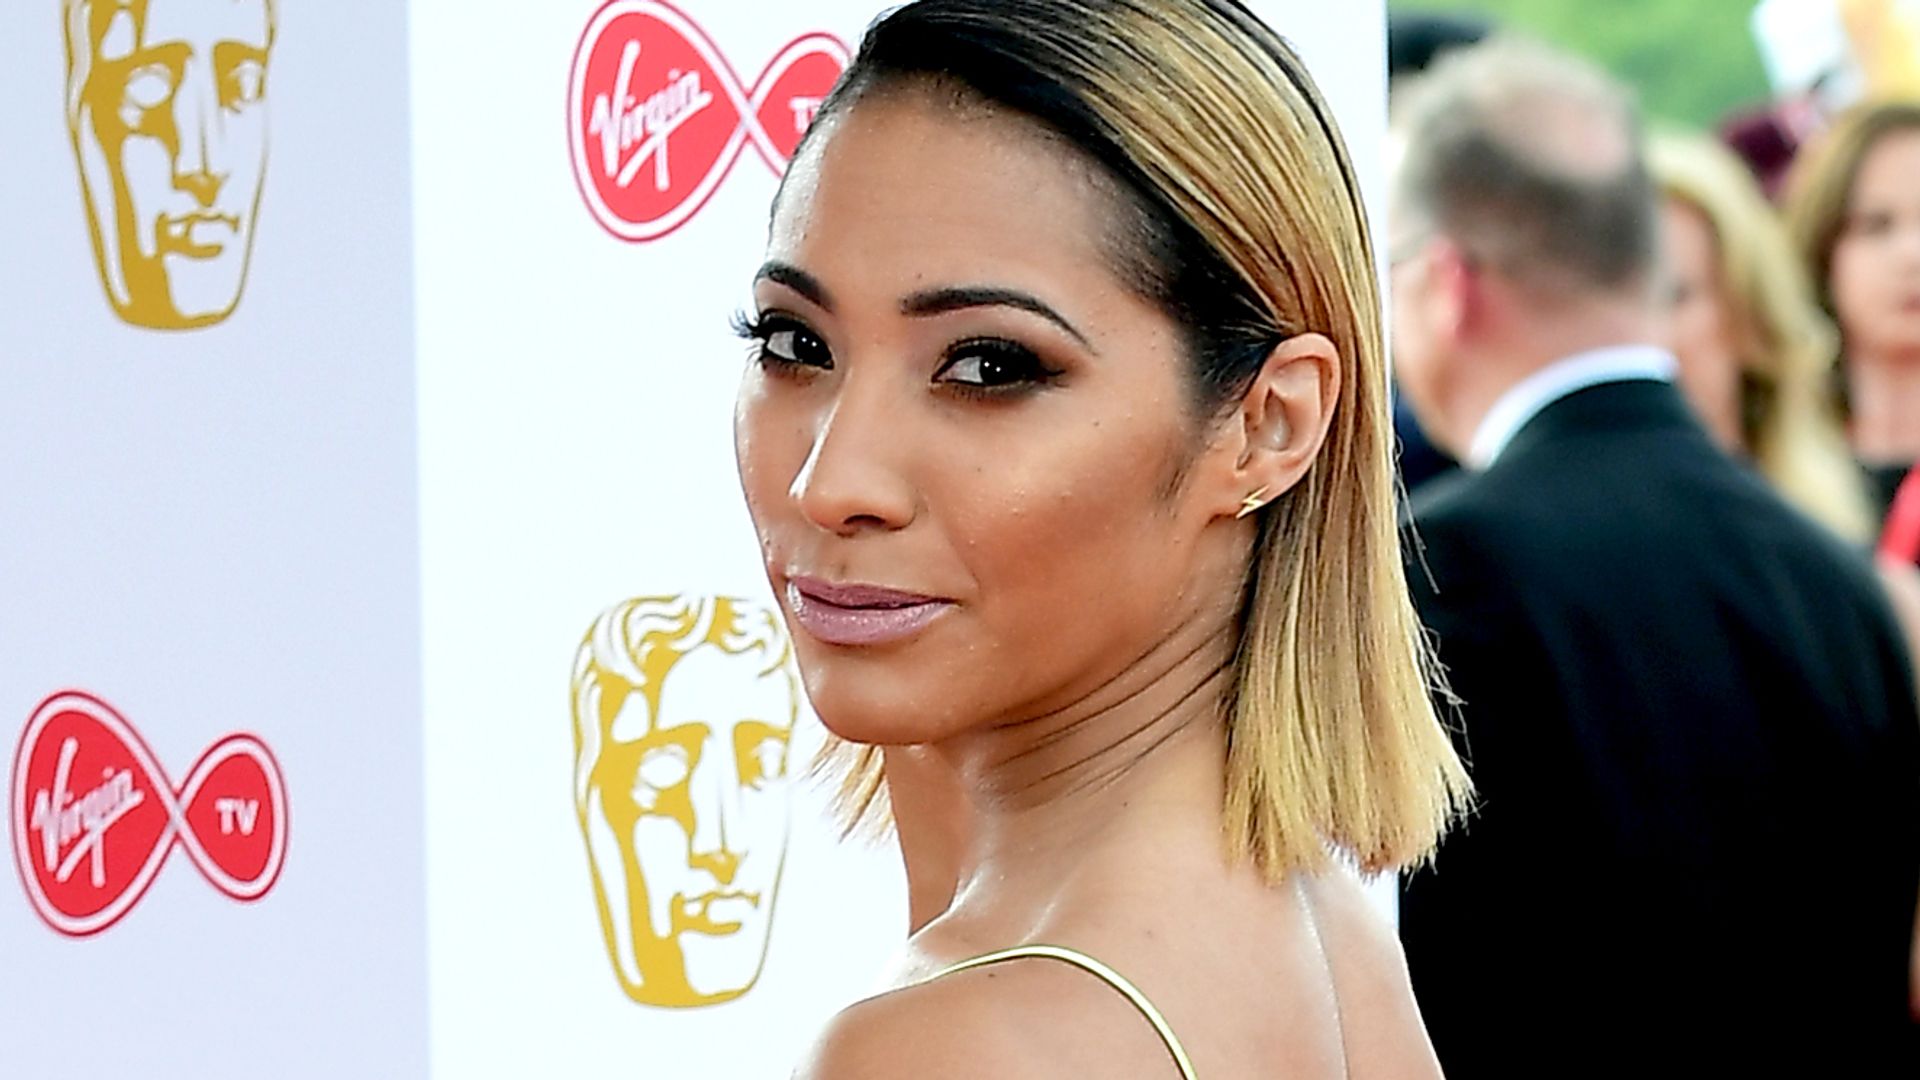 Karen Hauer in a yellow satin slip dress on the red carpet at the Virgin TV British Academy Television Awards 2018 